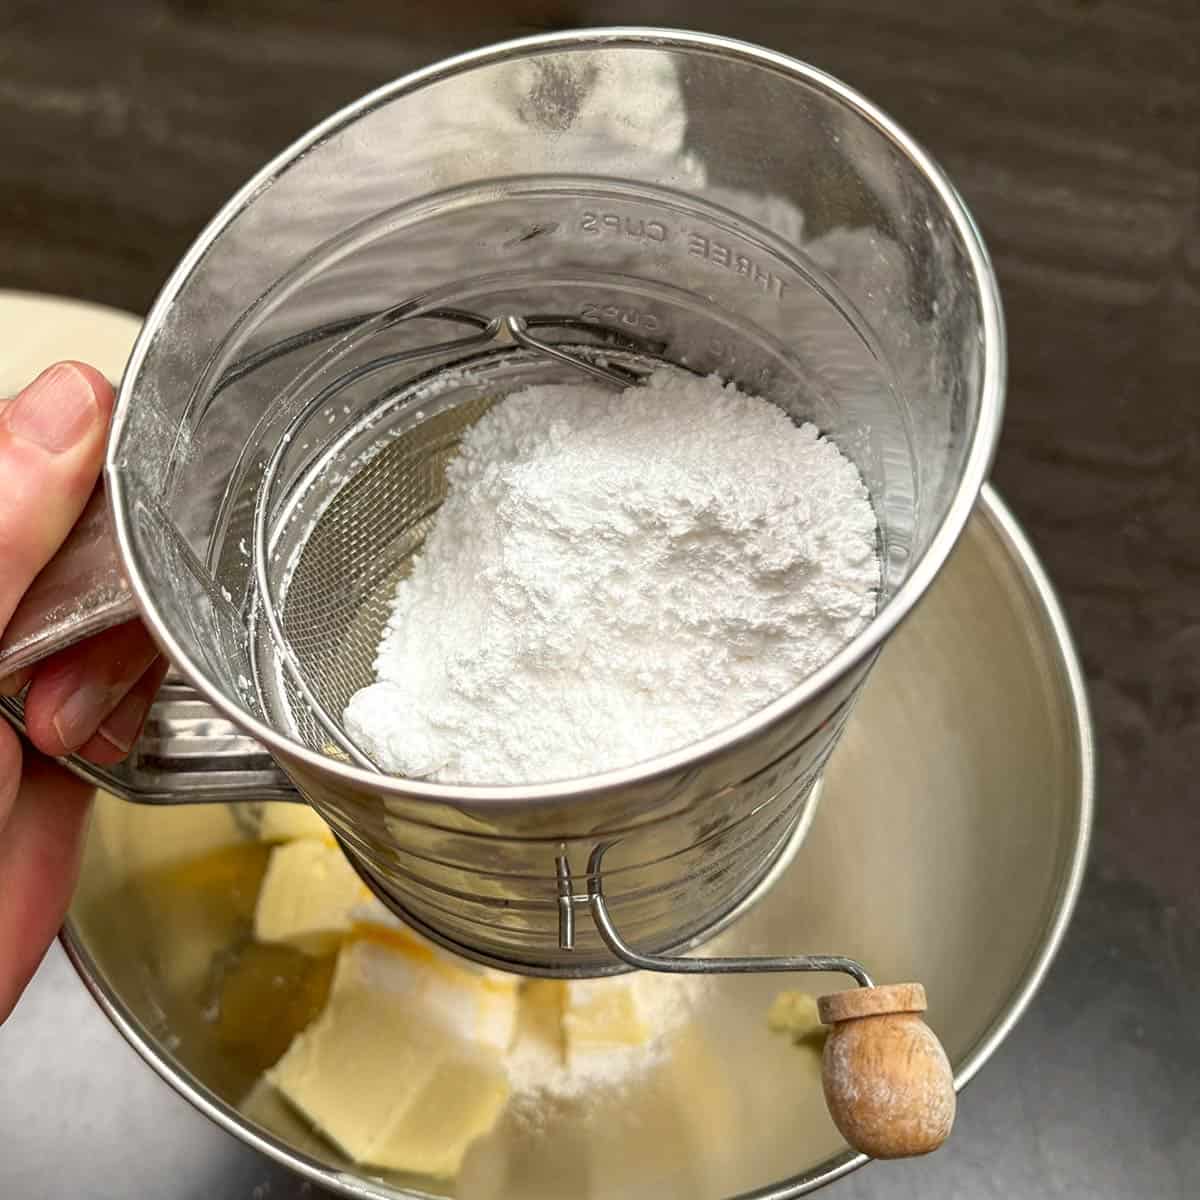 Sifting powdered sugar onto the cubed butter to be mixed.